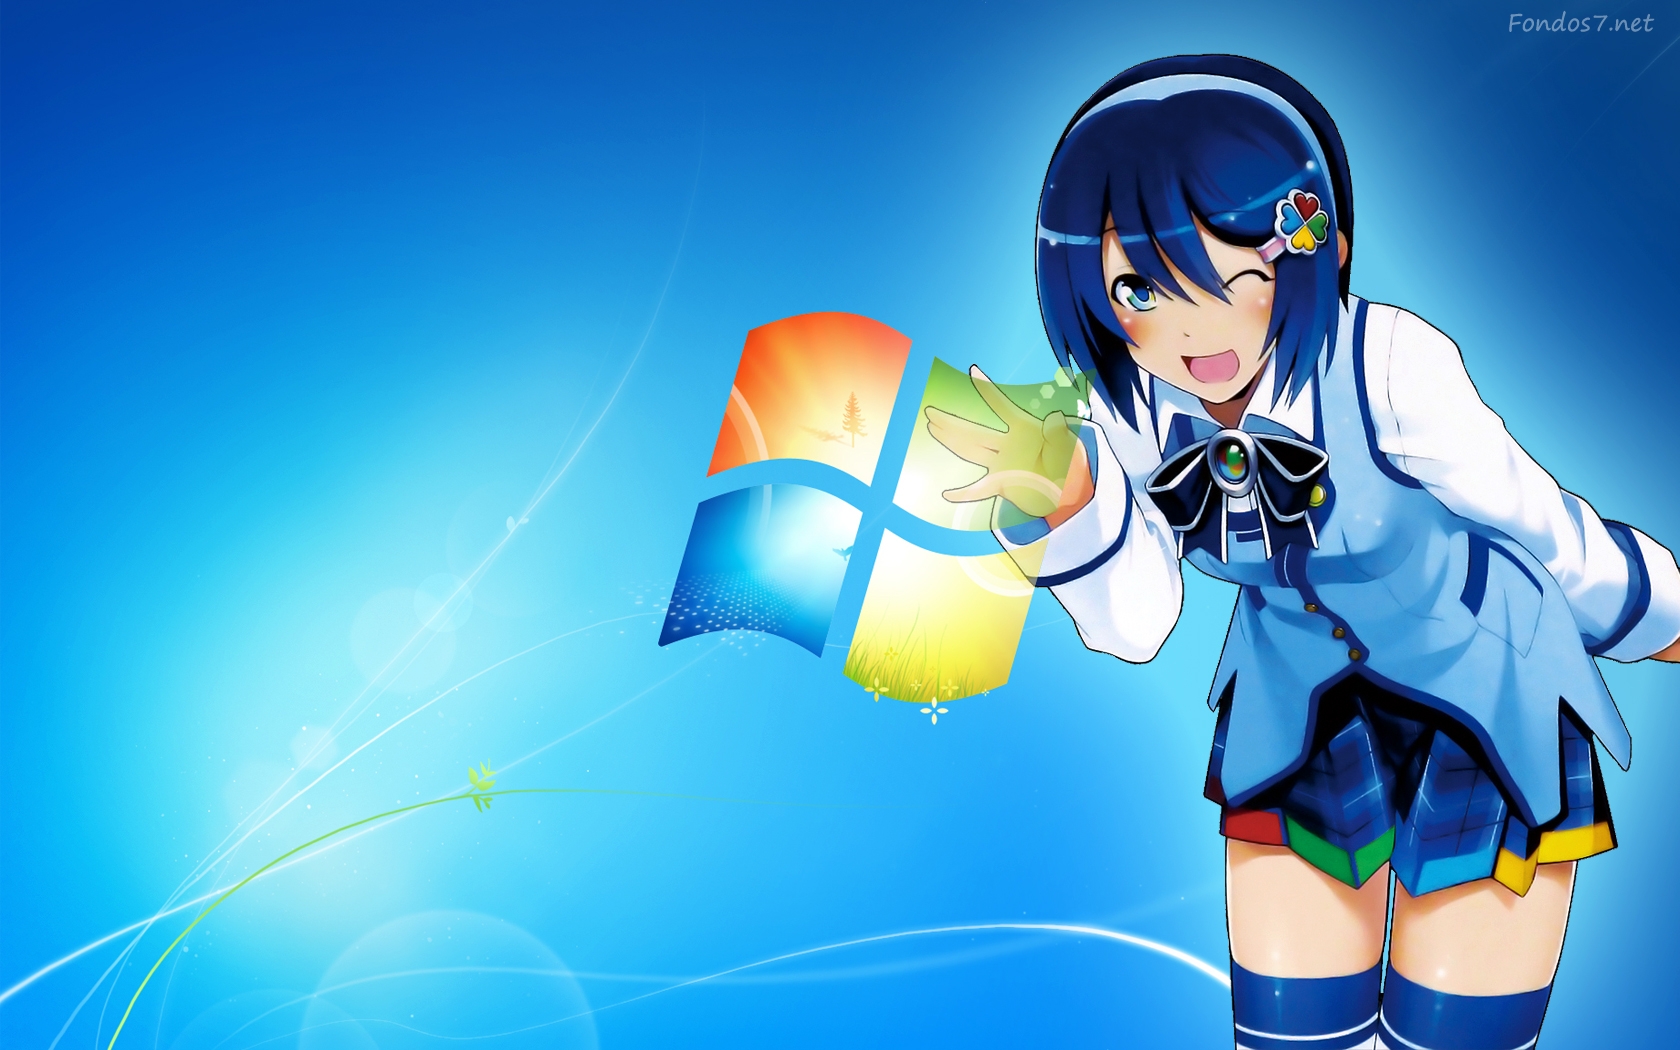 Anime HD wallpapers High Quality Backgrounds Wallpaperbooknet 1680x1050